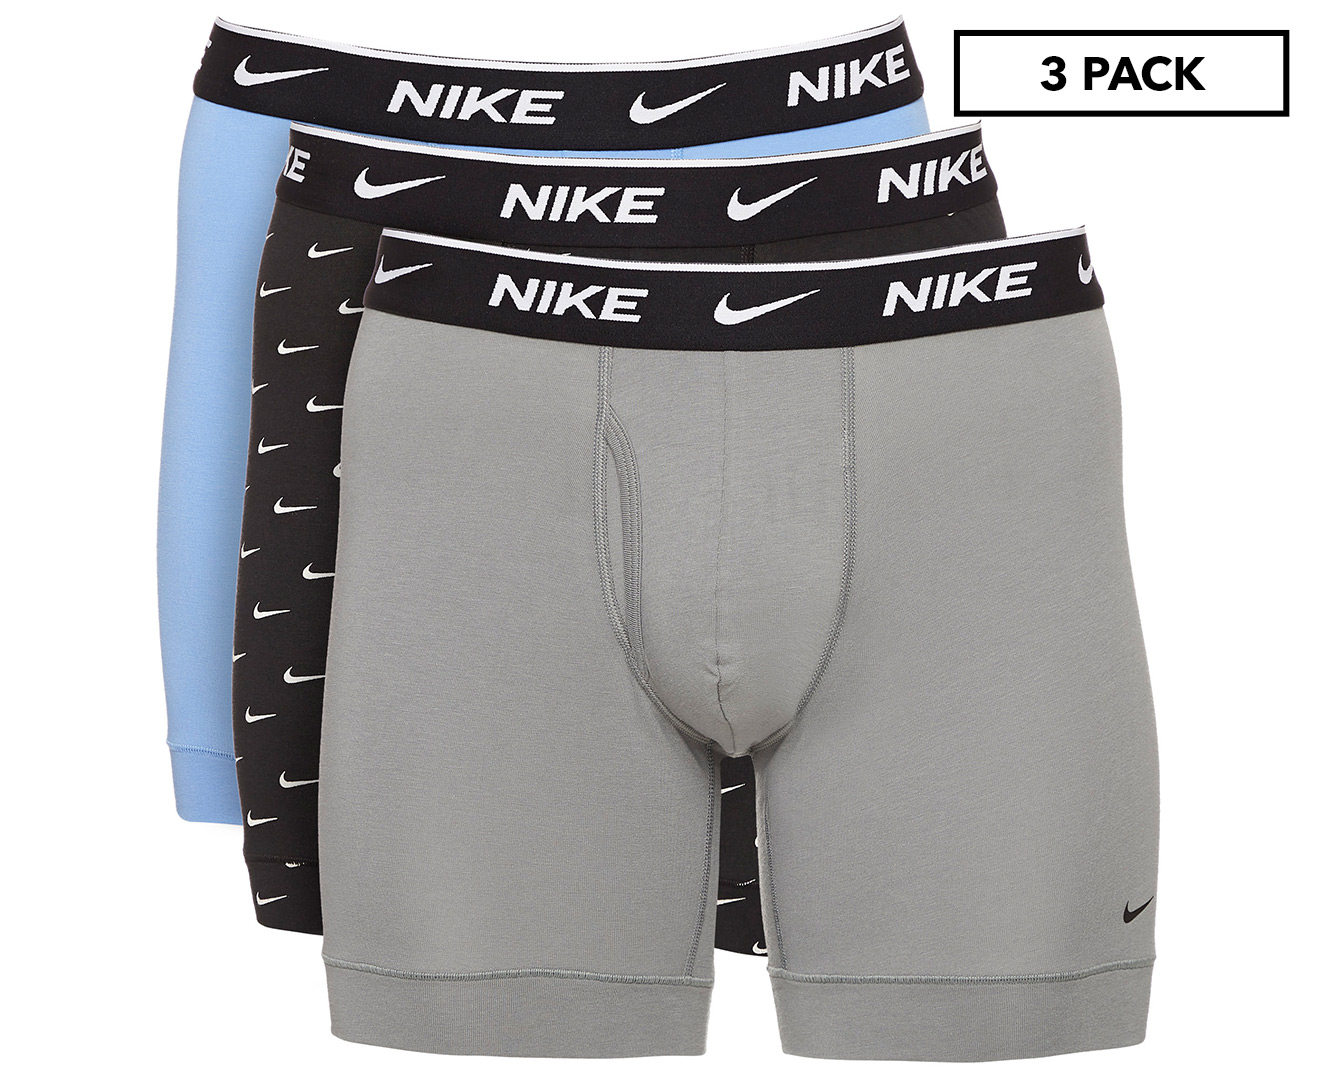 Nike Men's Everyday Cotton Stretch Boxer Briefs 3-Pack - Swoosh Print ...